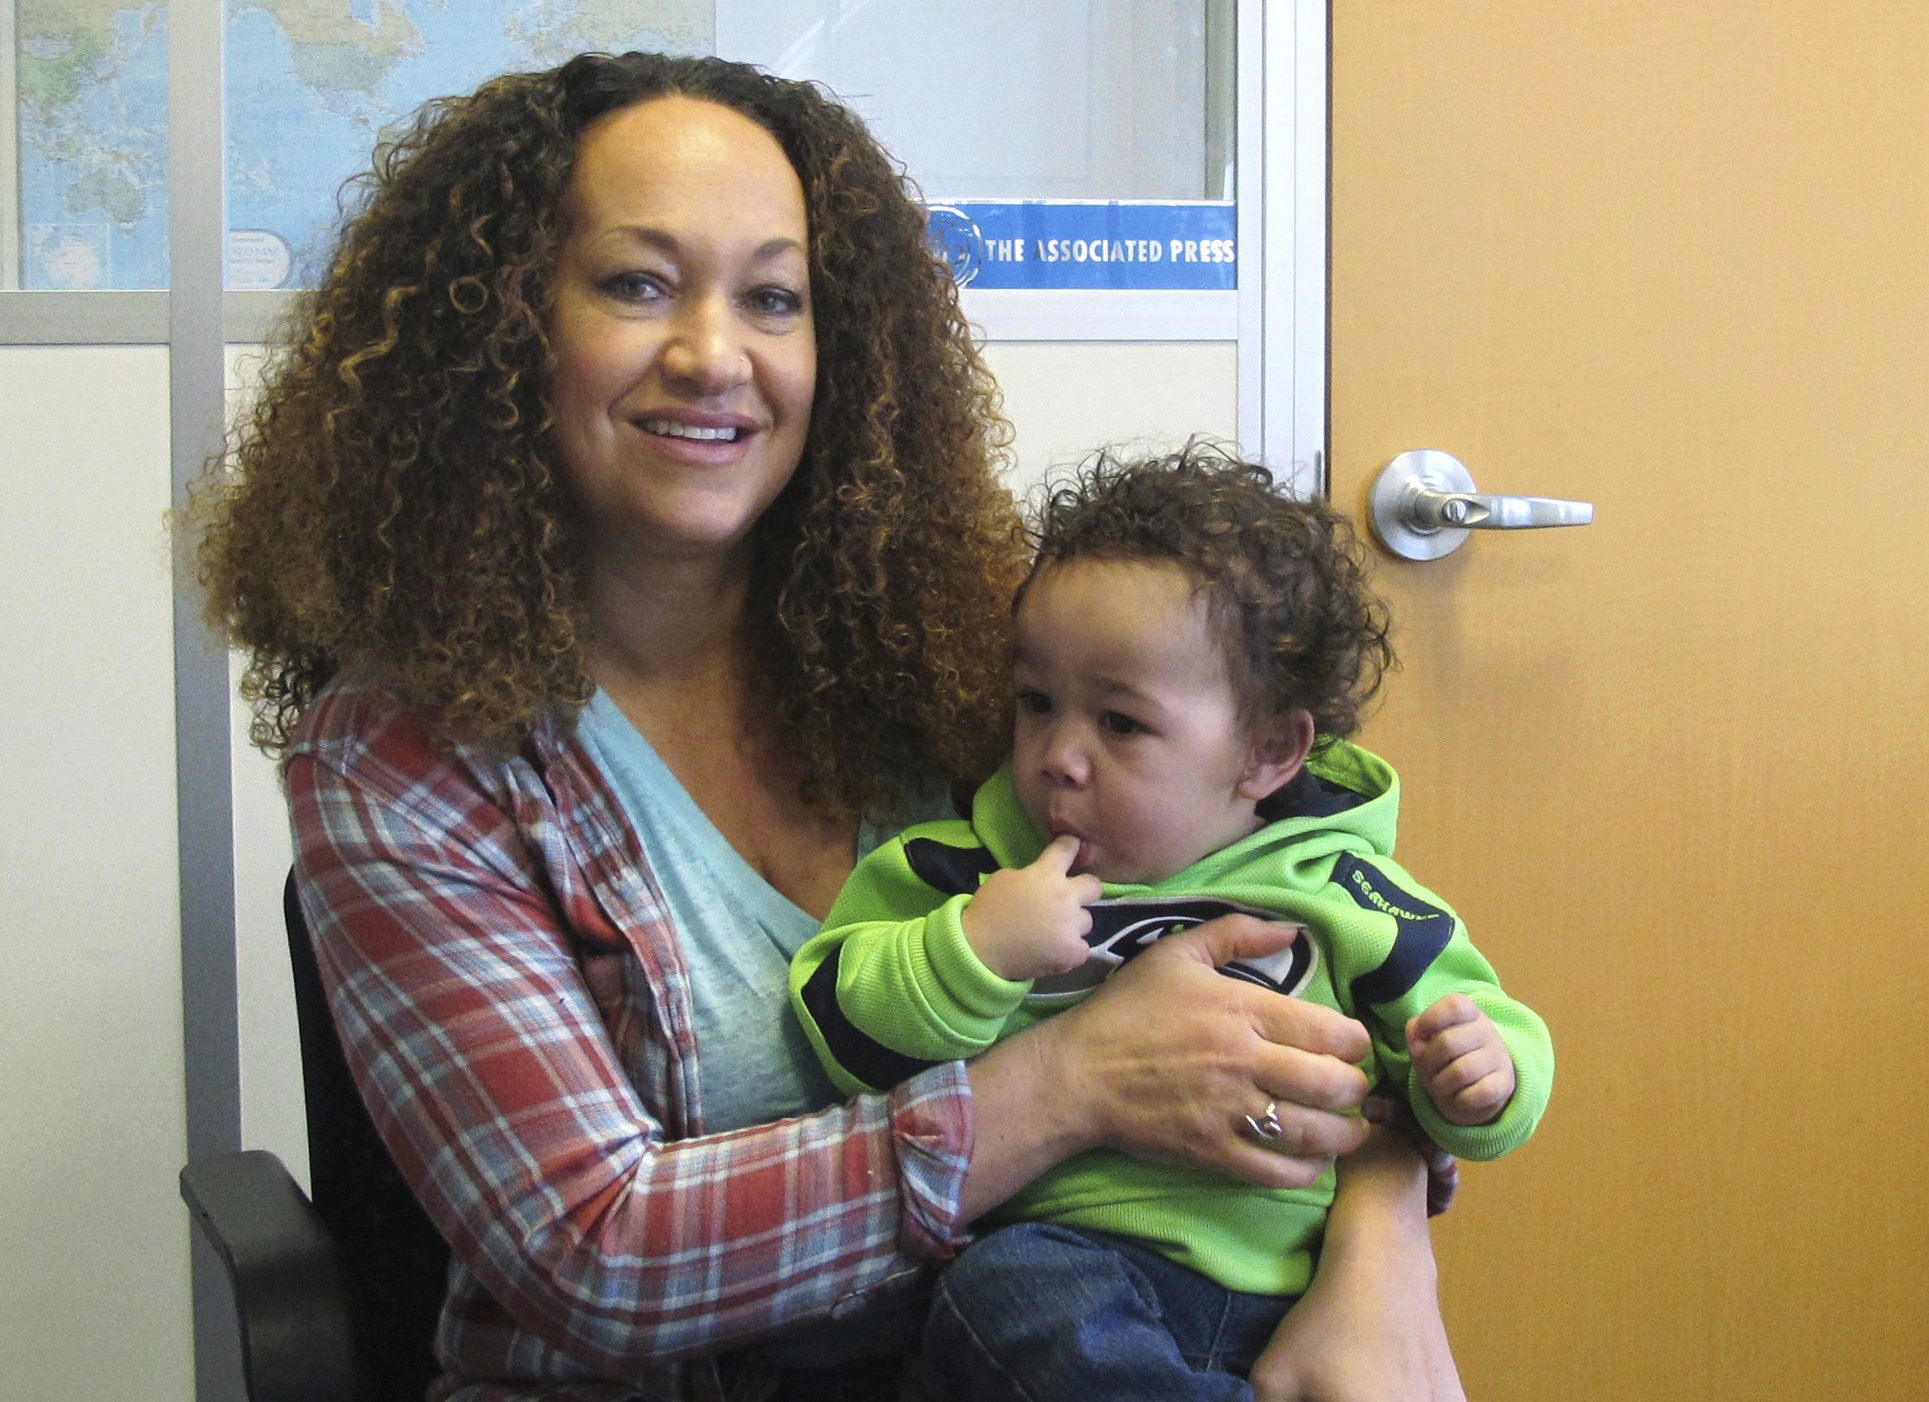 Rachel Dolezal poses for a photo with her son, Langston, in Spokane, Wash. on March 20, 2017.